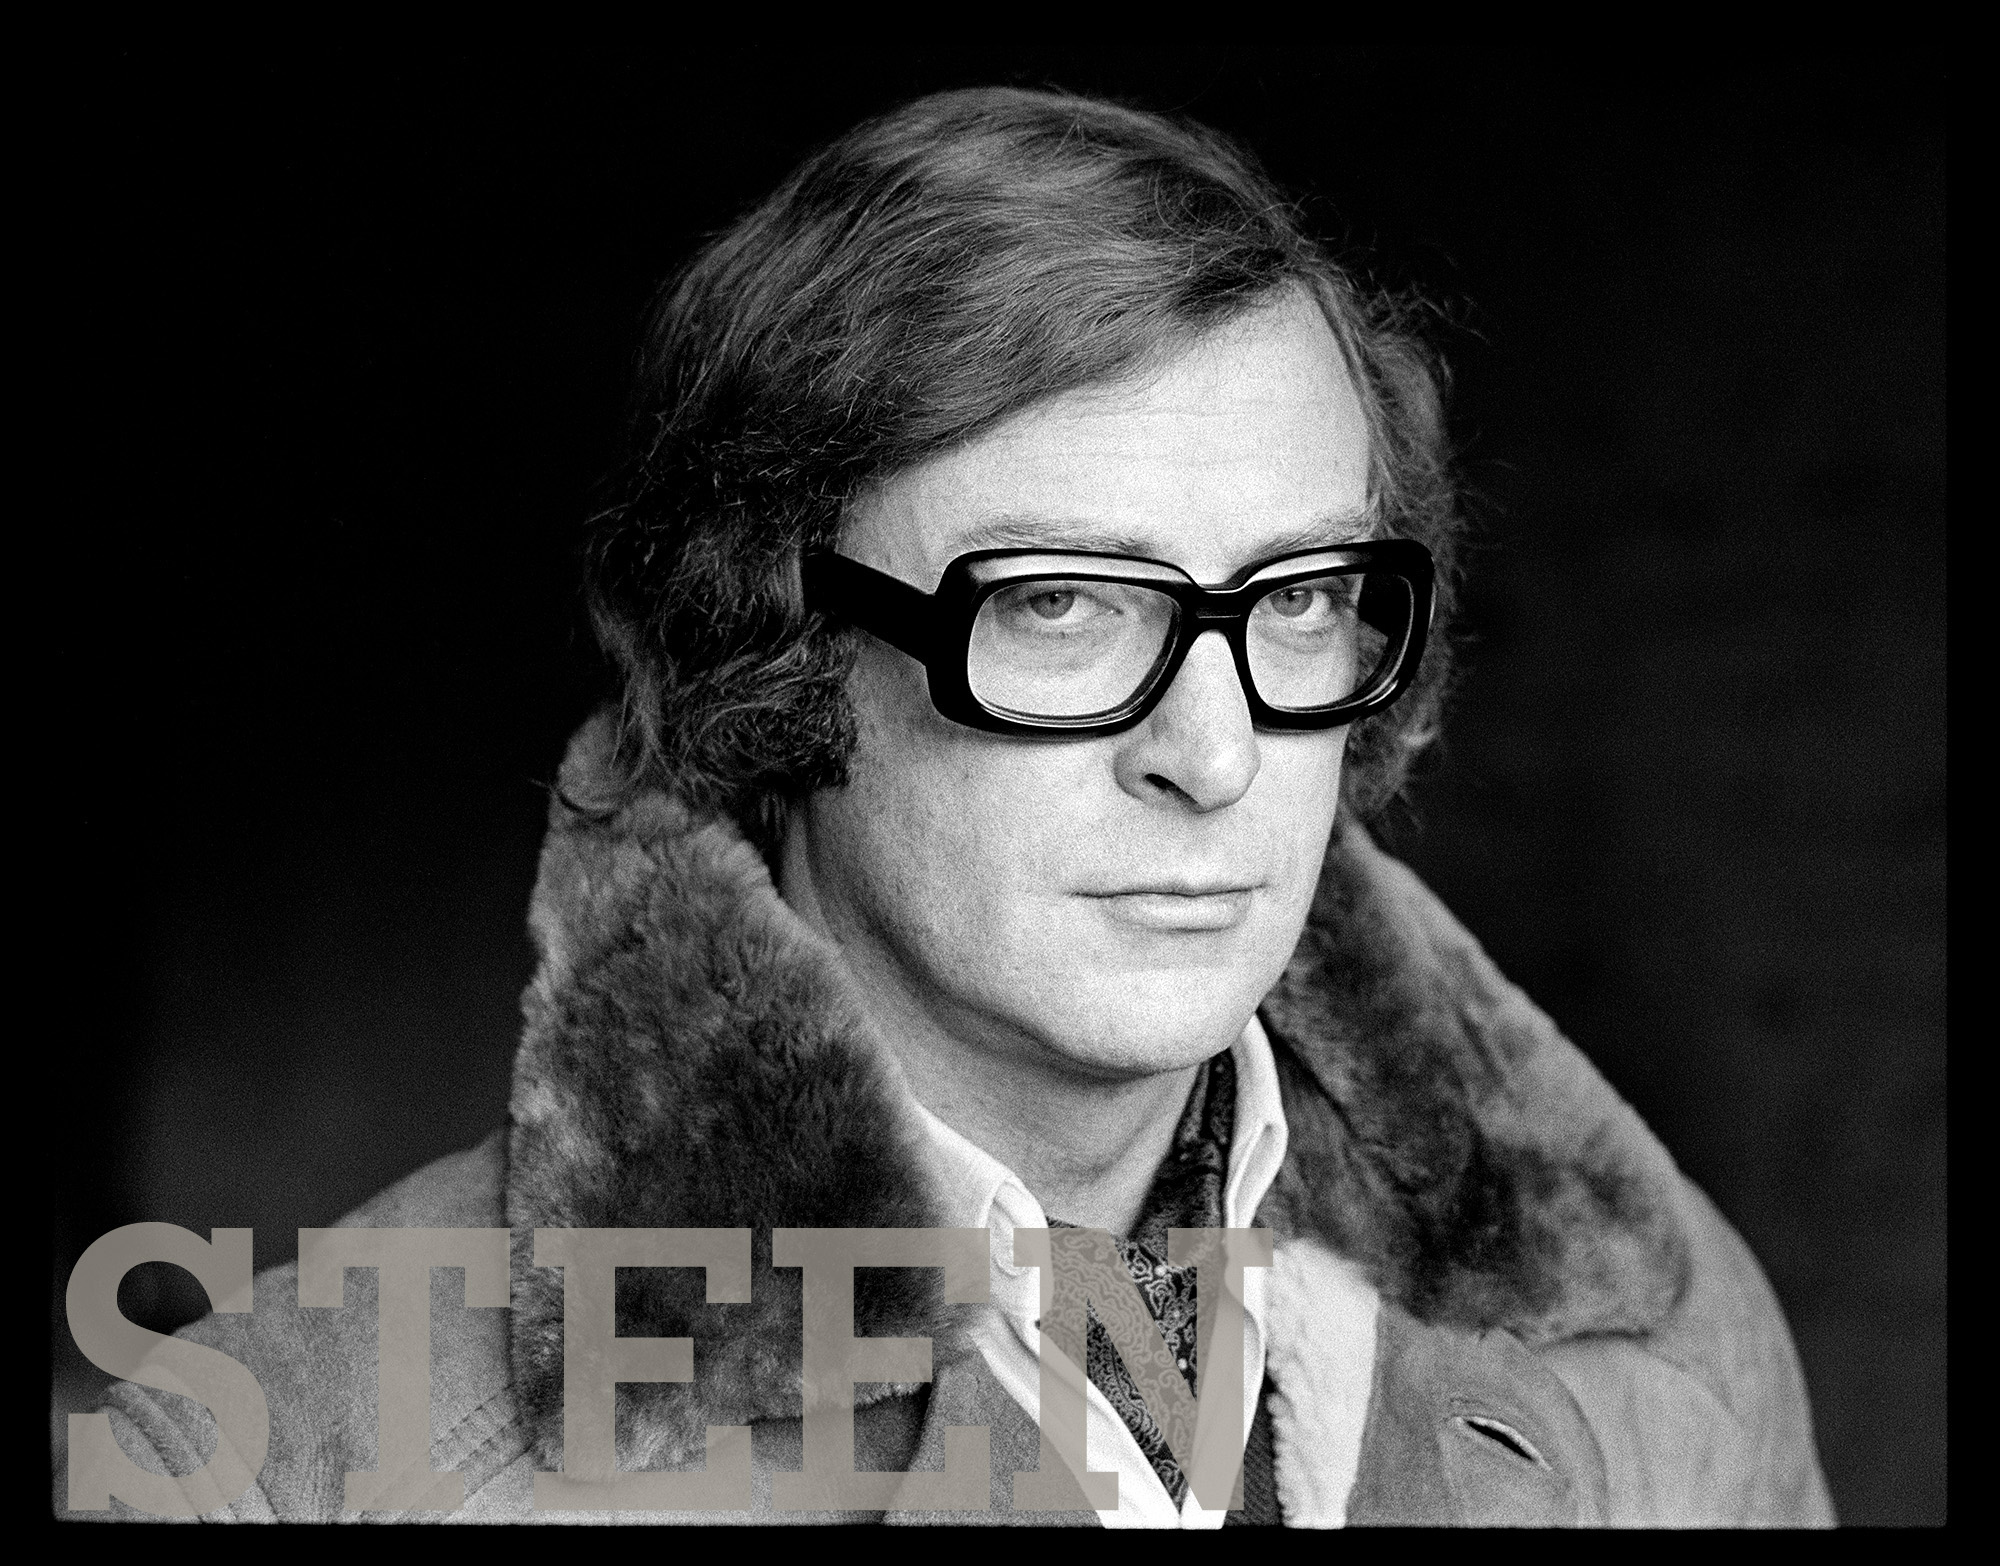 an exclusive portrait photograph of british actor michael caine by photographer david steen